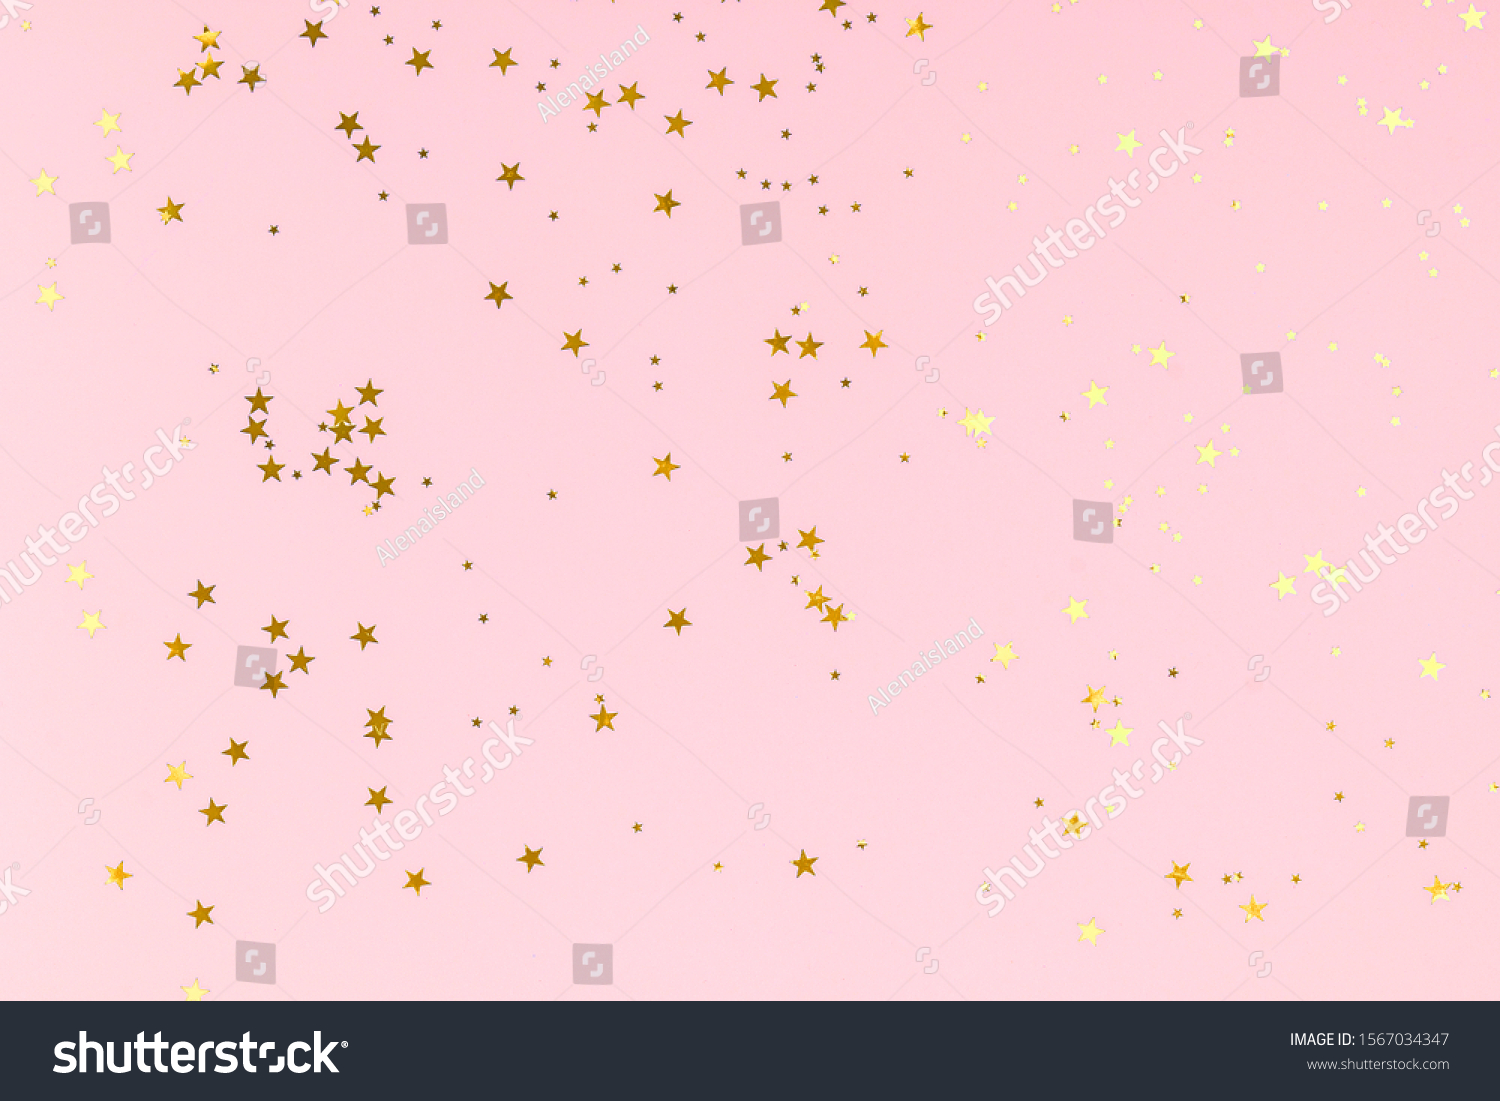 Golden stars glitter confetti in abstract style on pink background. Gold sparkles texture. Holiday new year backdrop. Anniversary, birthday. Greeting card template. #1567034347